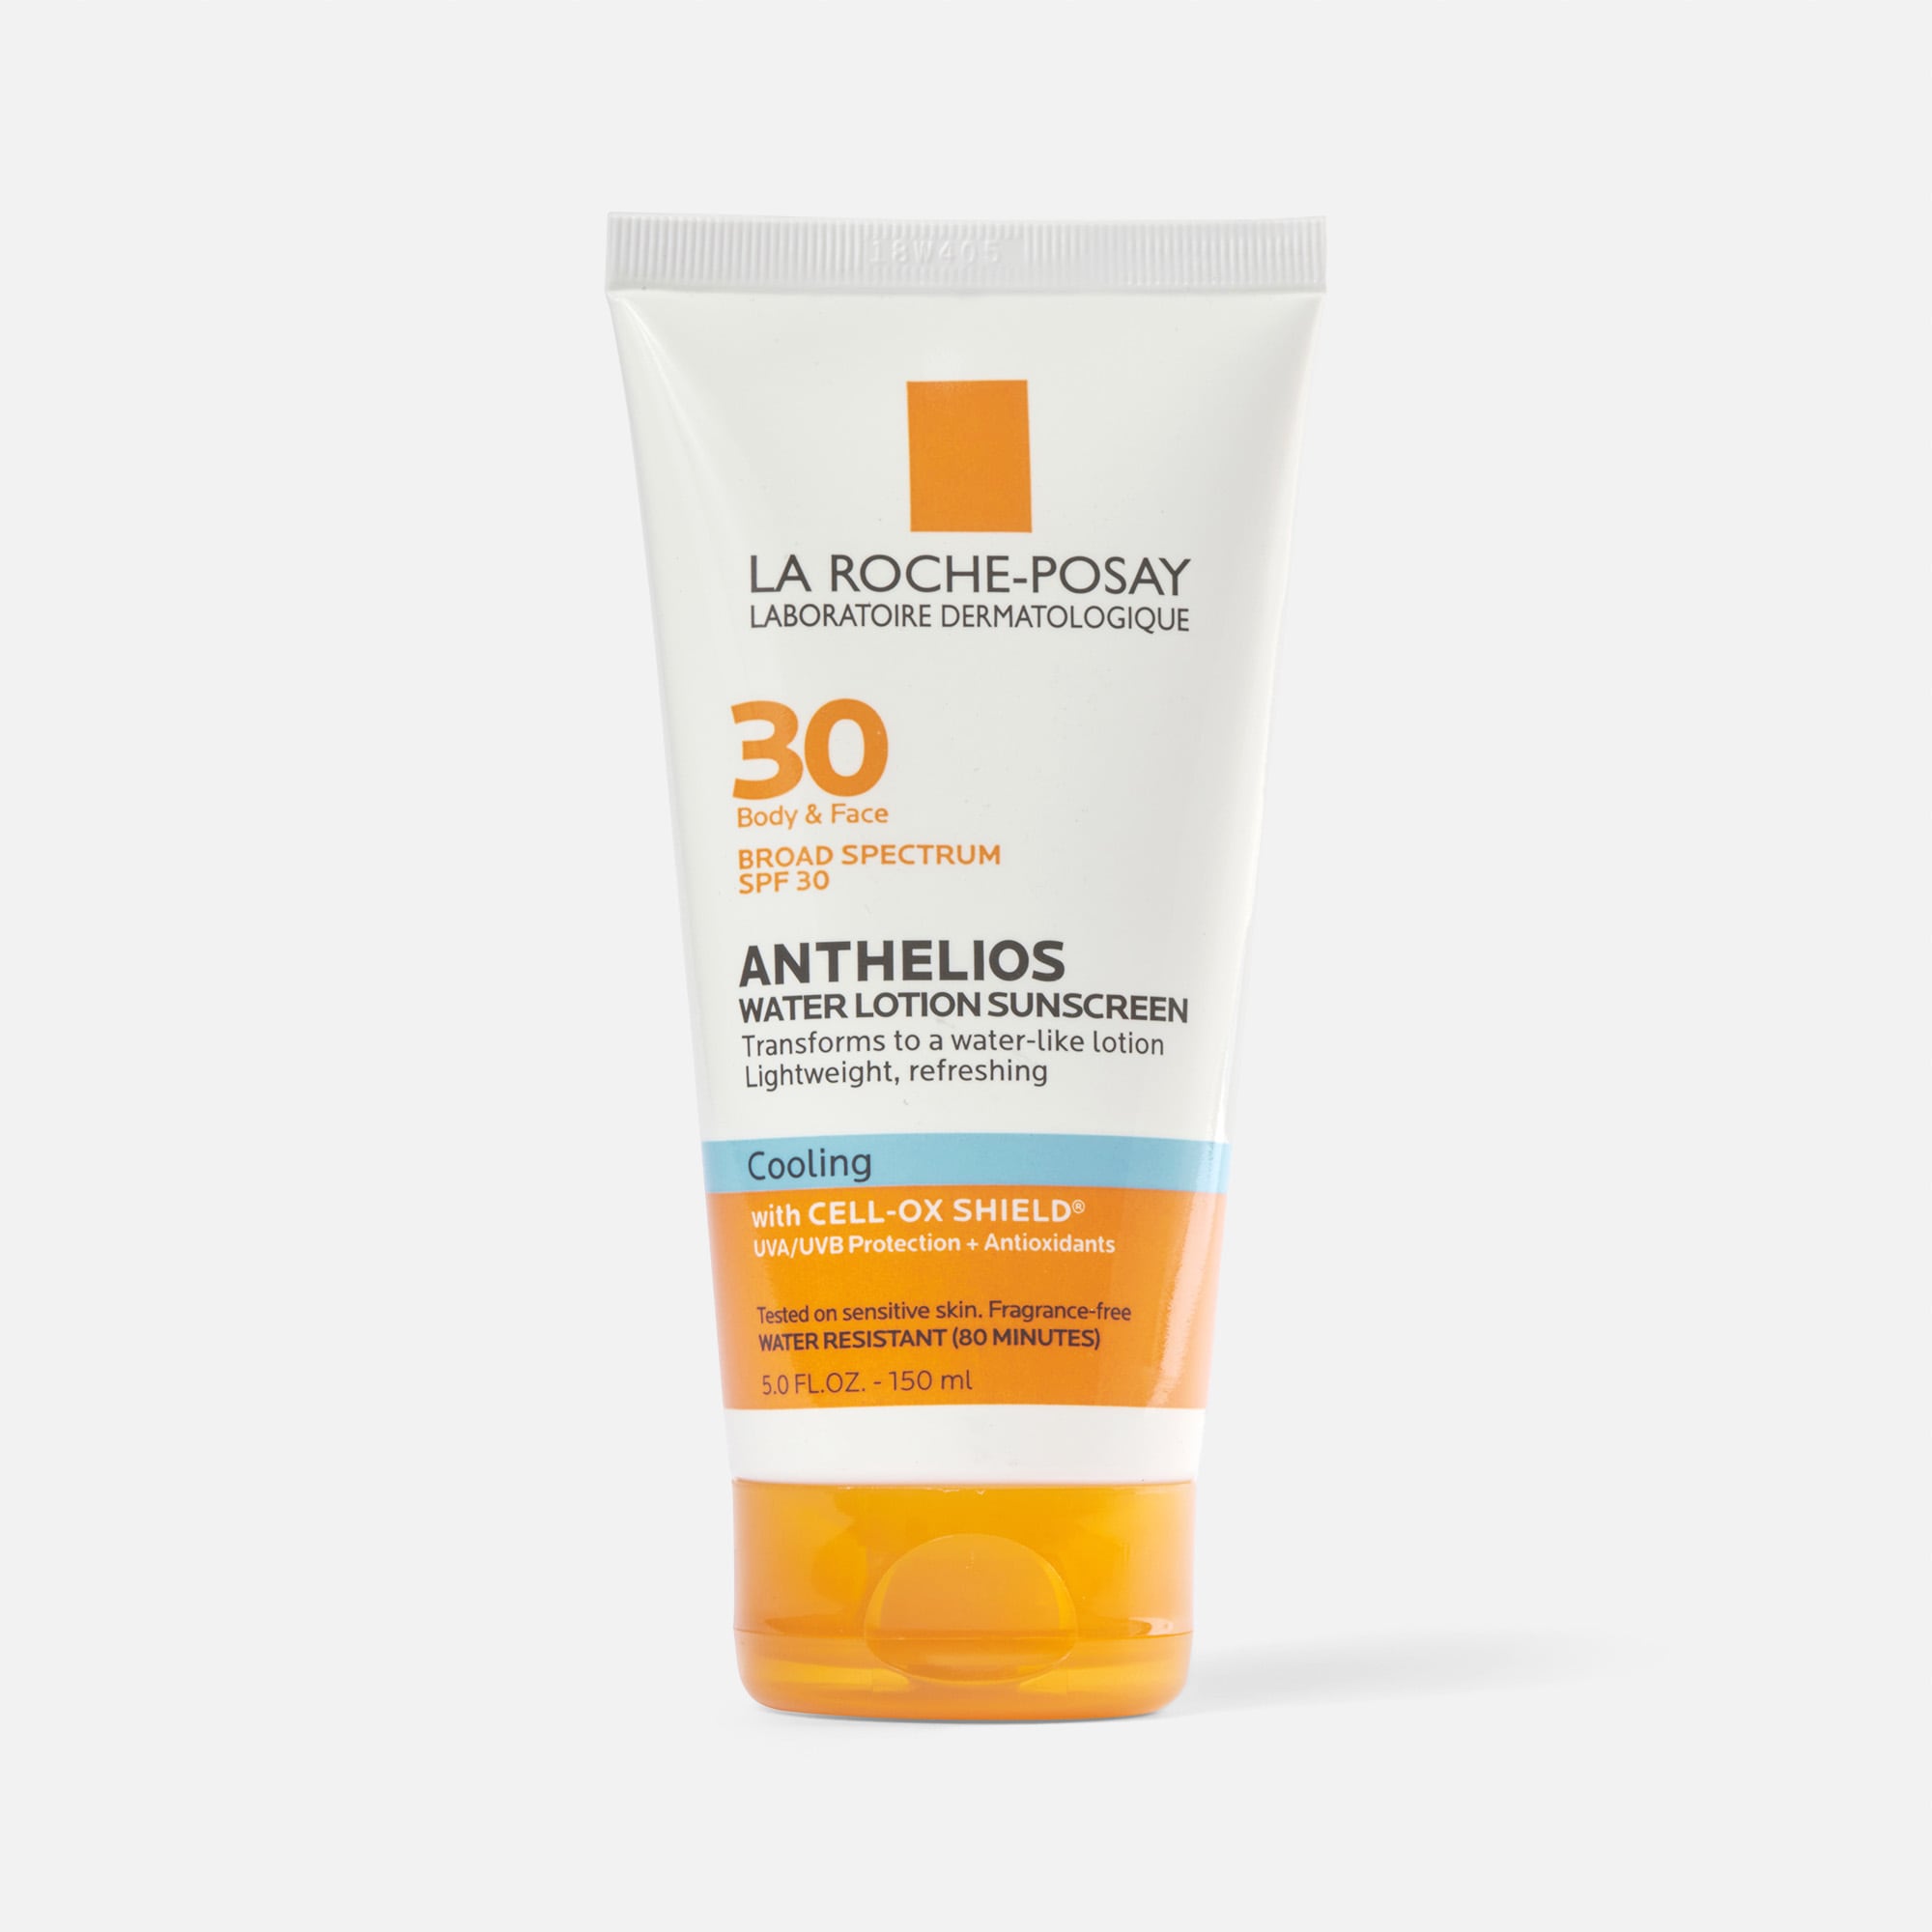 La Roche-Posay Anthelios Cooling Water Sunscreen Lotion, 5 fl oz